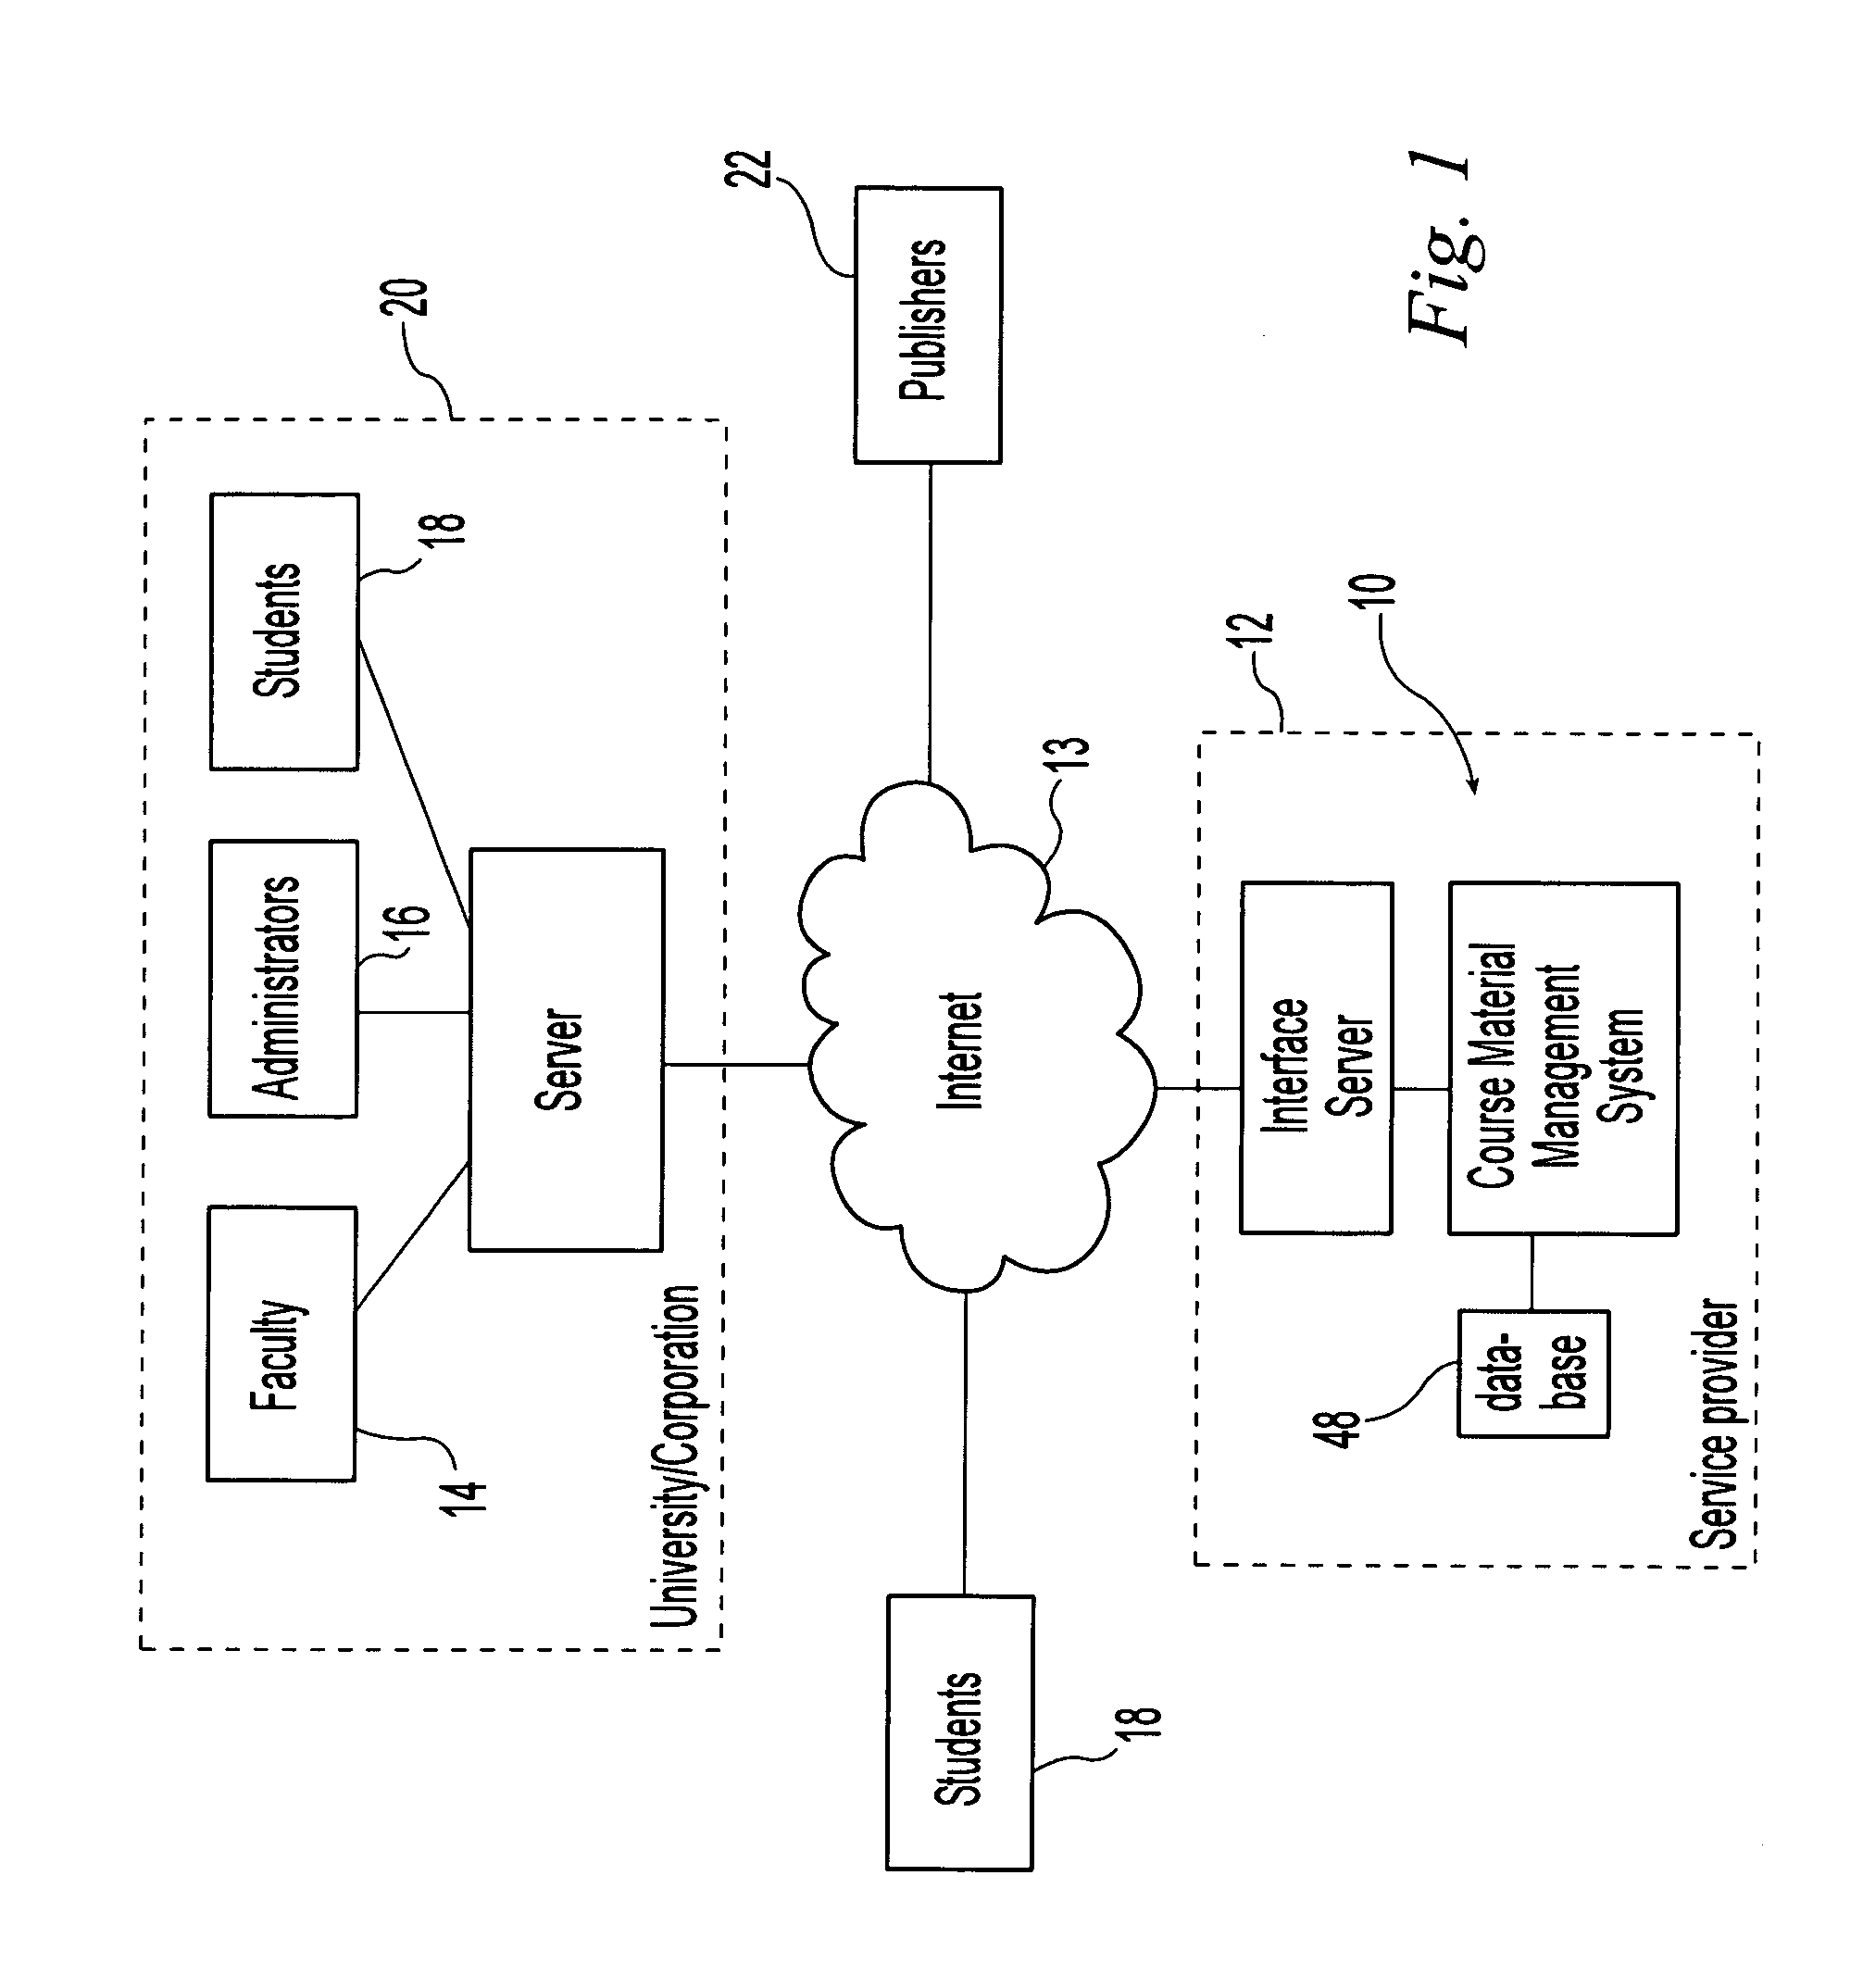 System and method for selecting and managing course materials with integrated distribution and sales of materials